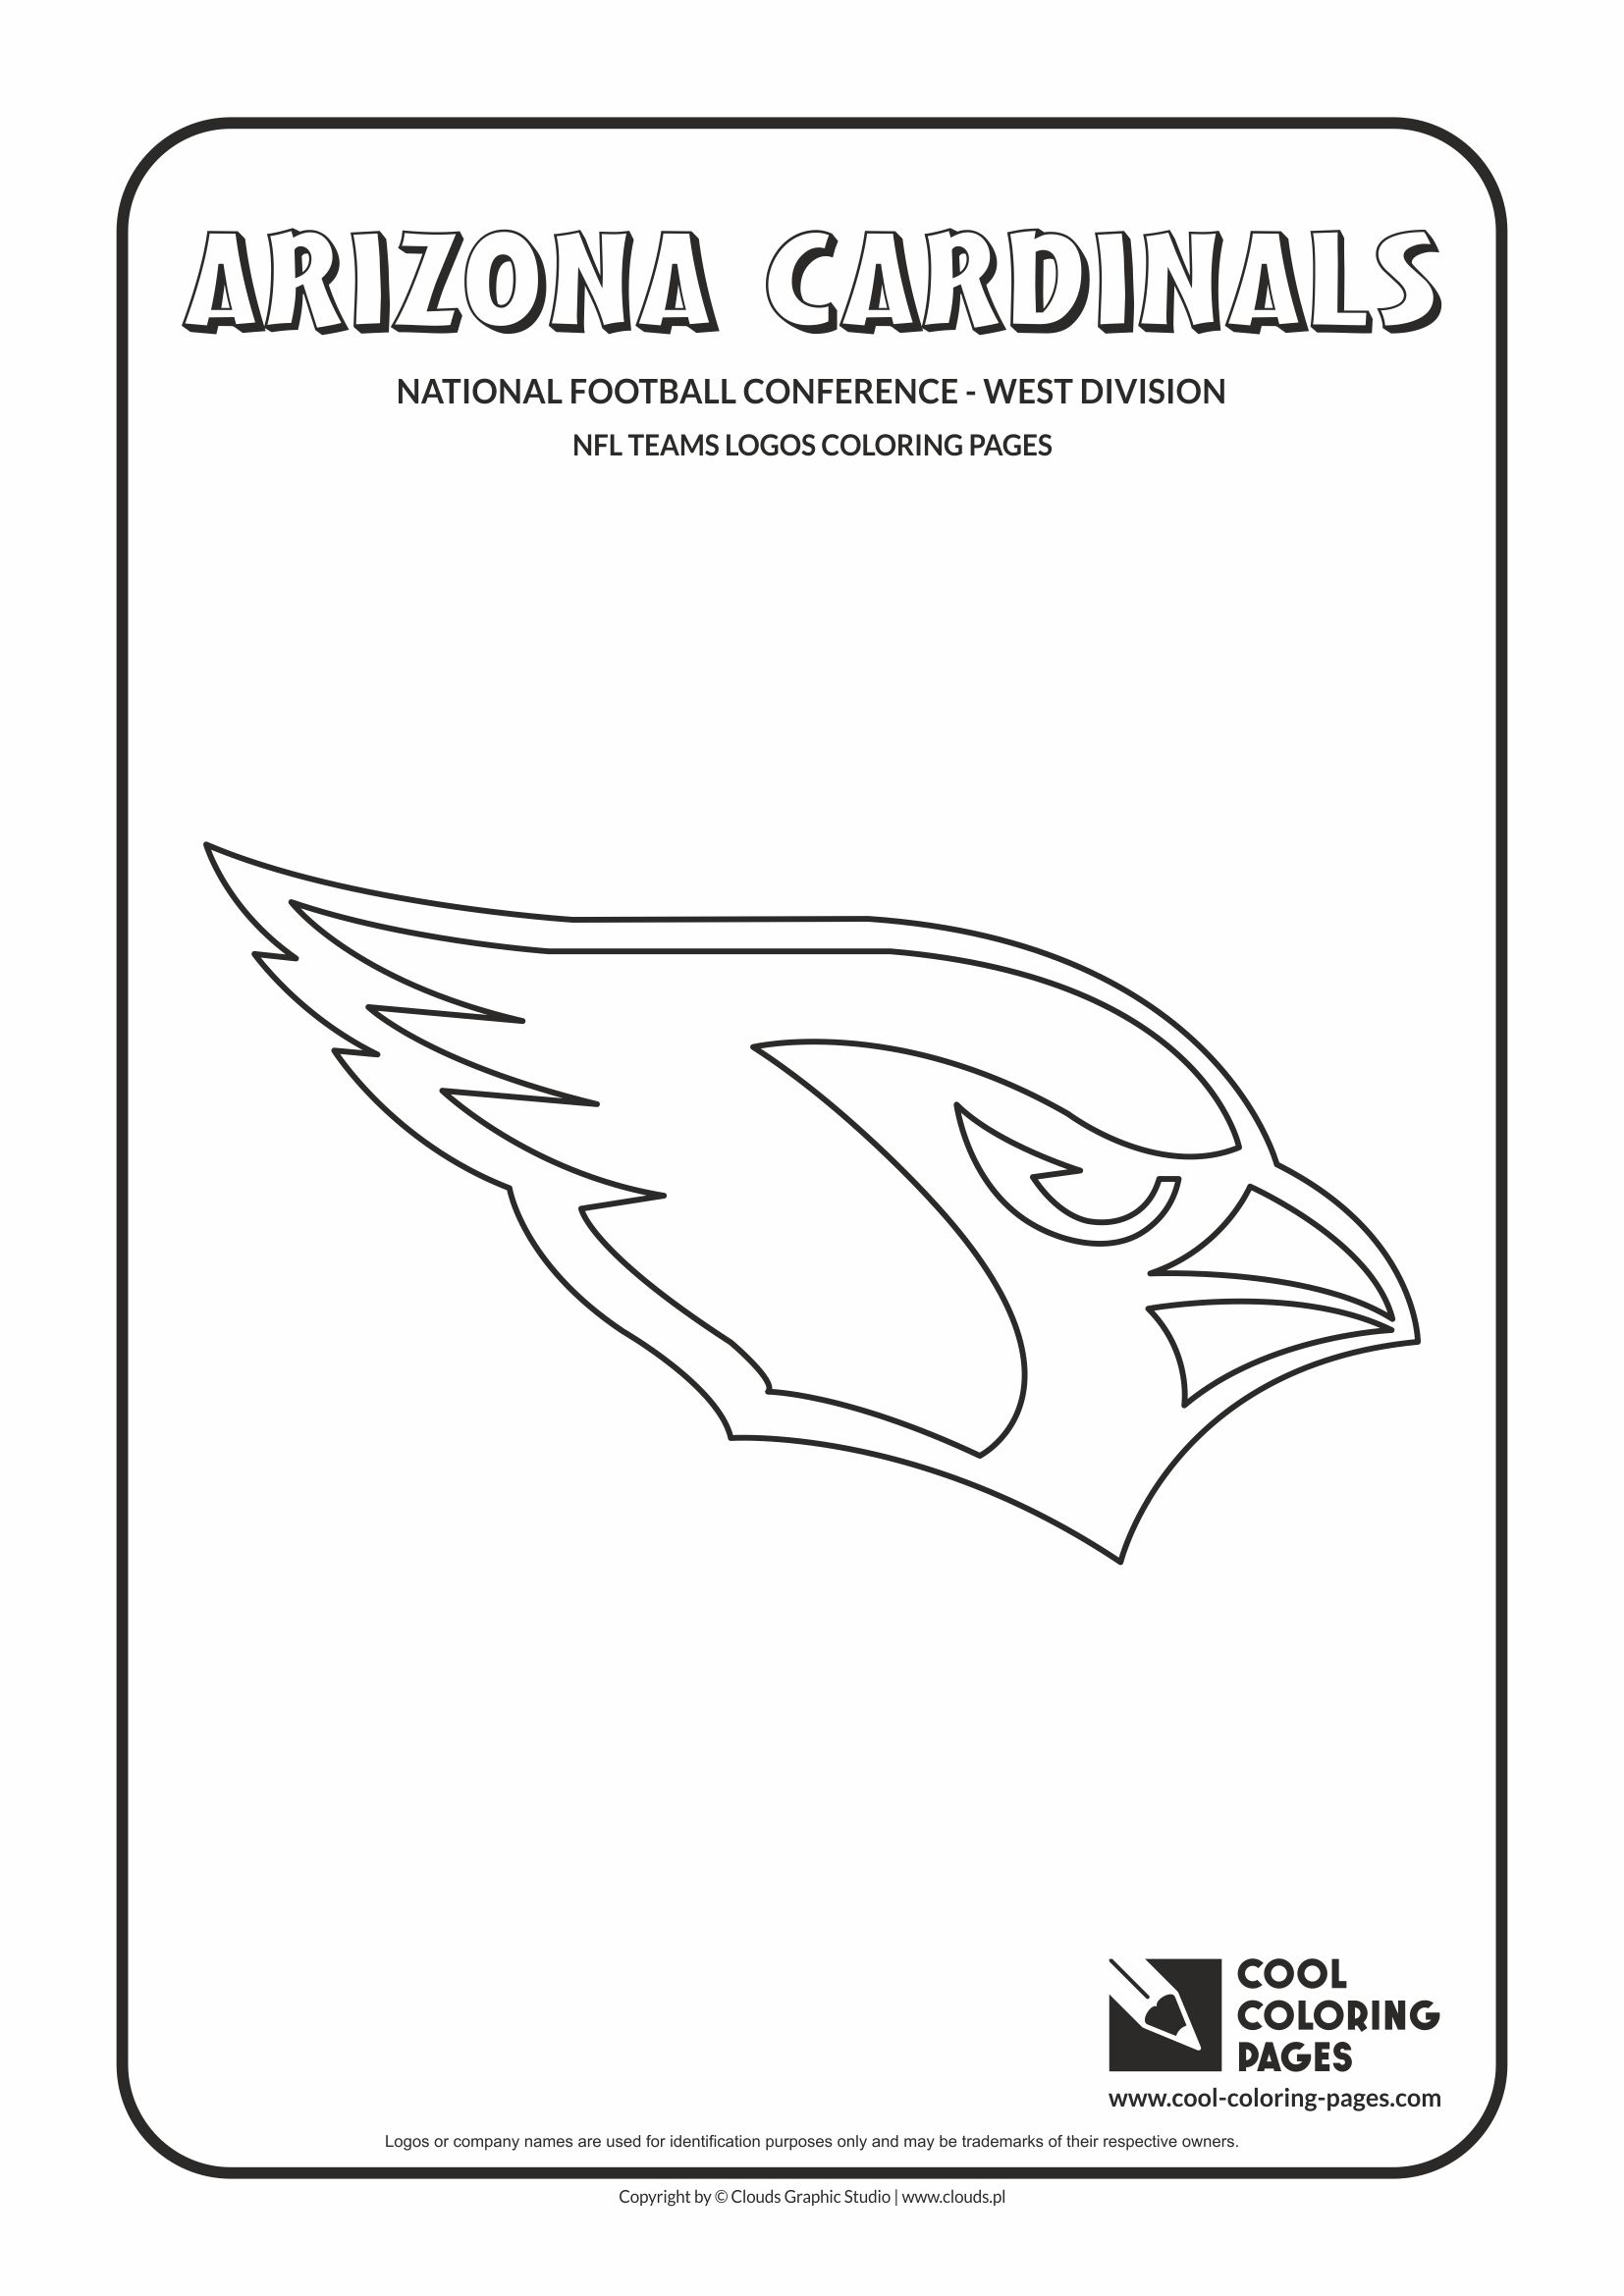 MLB Team Logos Coloring Pages for Kids - Download MLB Team Logos